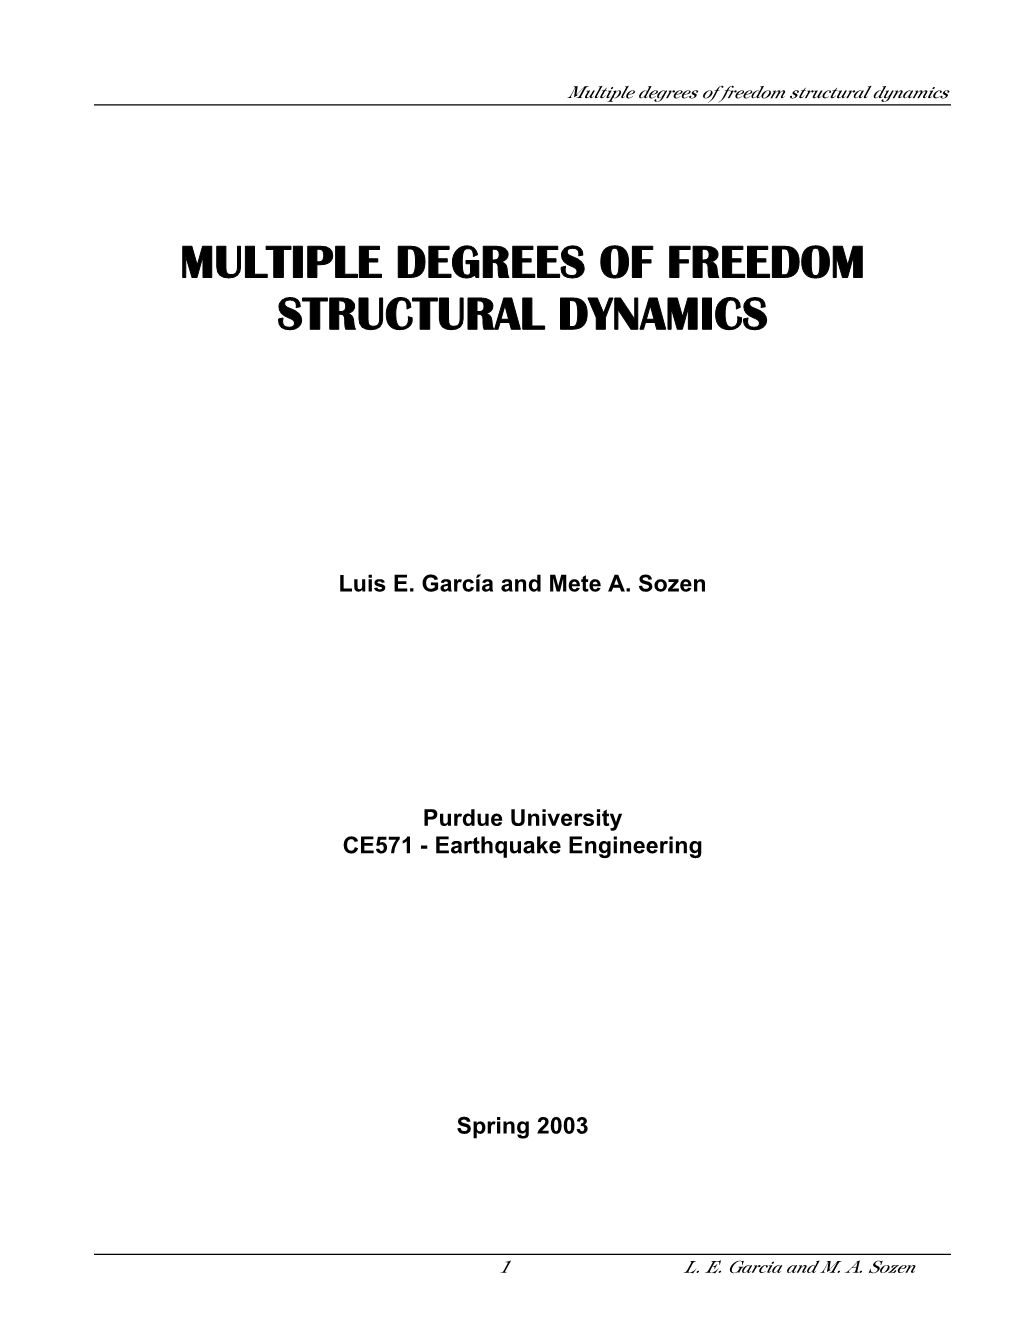 Multiple Degrees of Freedom Structural Dynamics